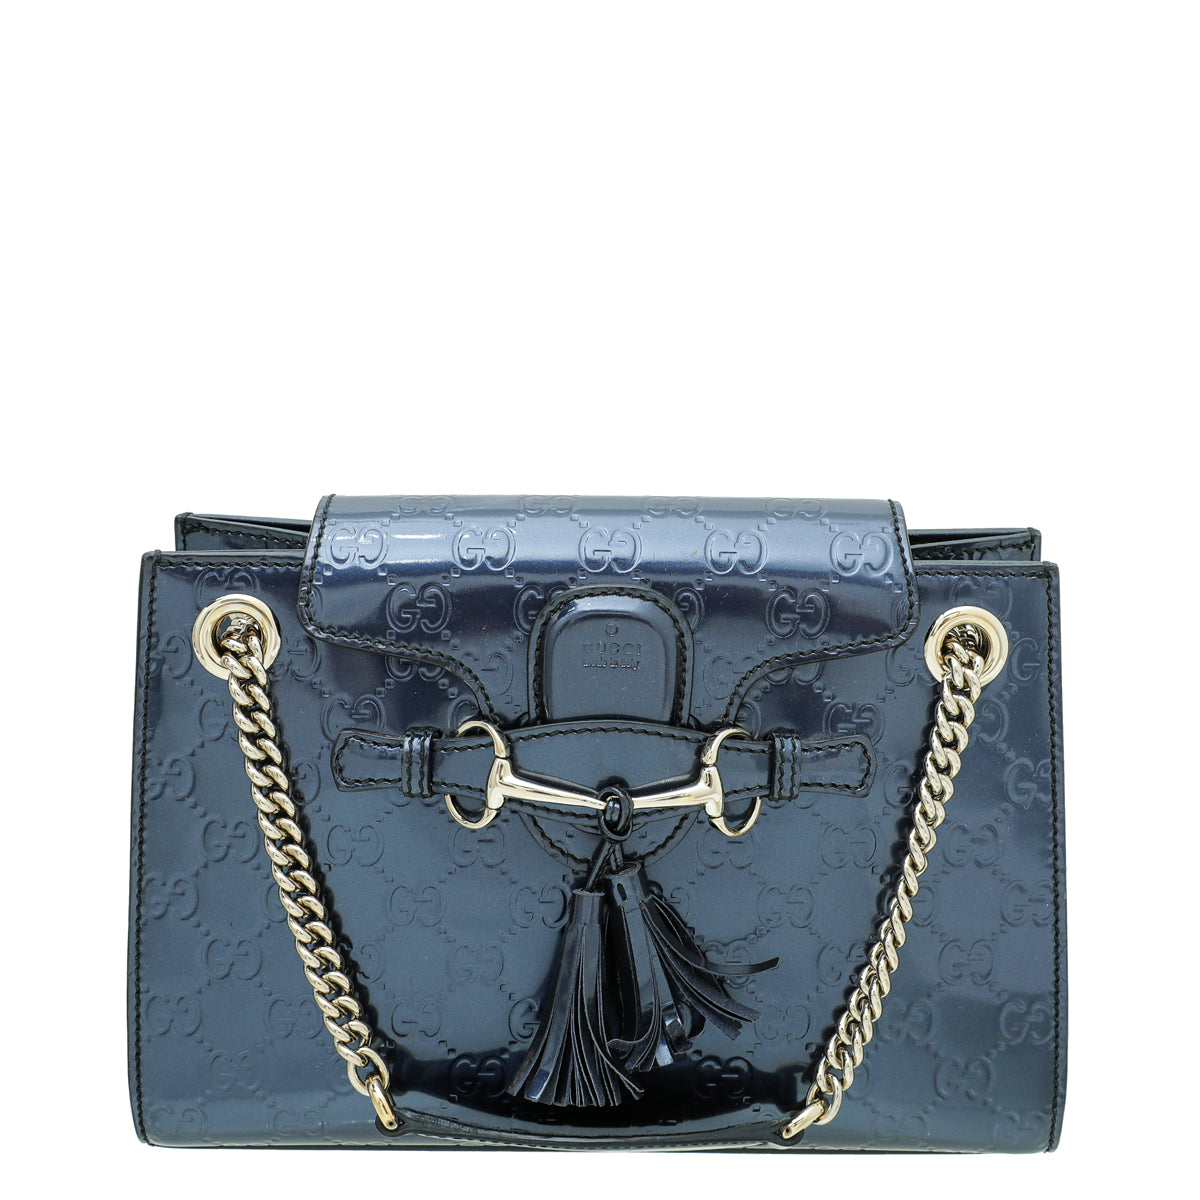 Gucci Navy Blue Emily Small Bag